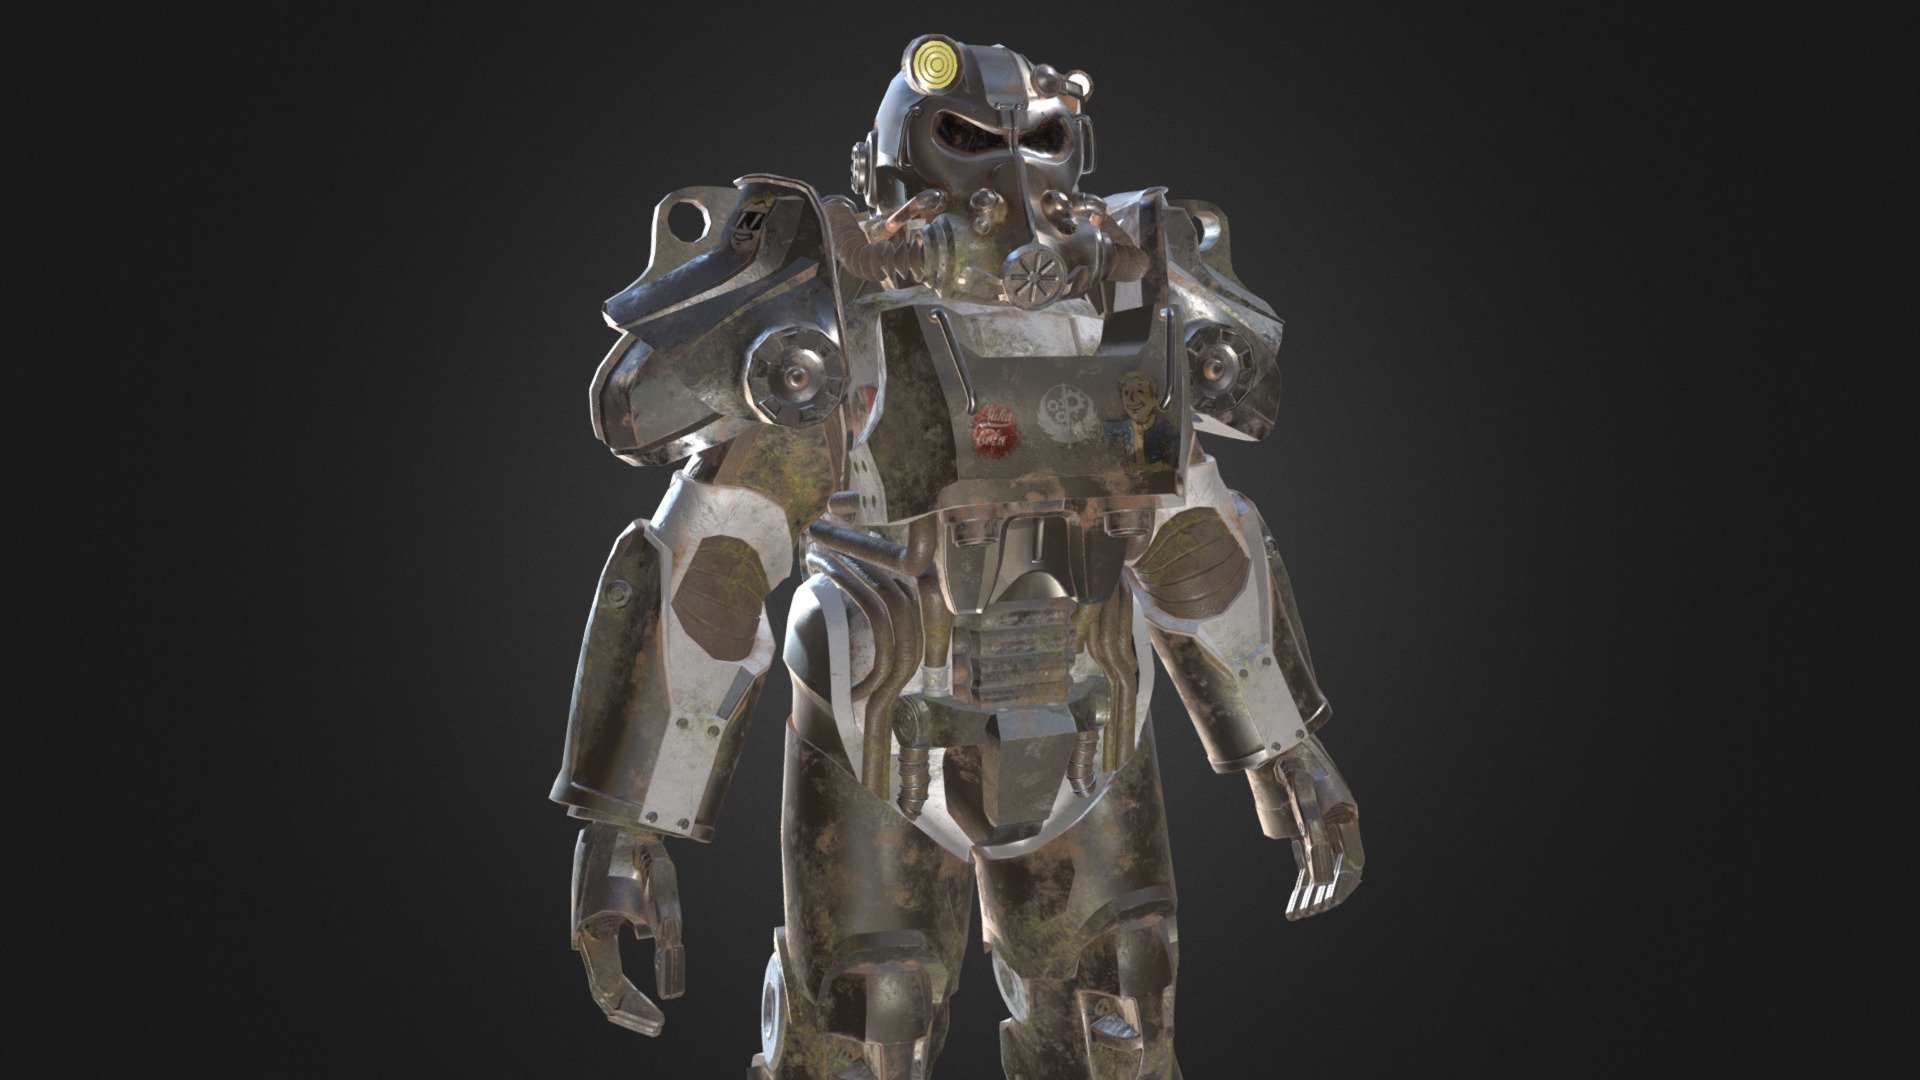 Experience in Maya for 2 years. Skills - Maya, Marmoset, Substance Painter, 3d max, Uv layout, Photoshop. Works-https://winistep.artstation.com/ studied at courses and at home in Photoshop 5 years work experience - Power Armor T-60 - 3D model by winistep 3d model